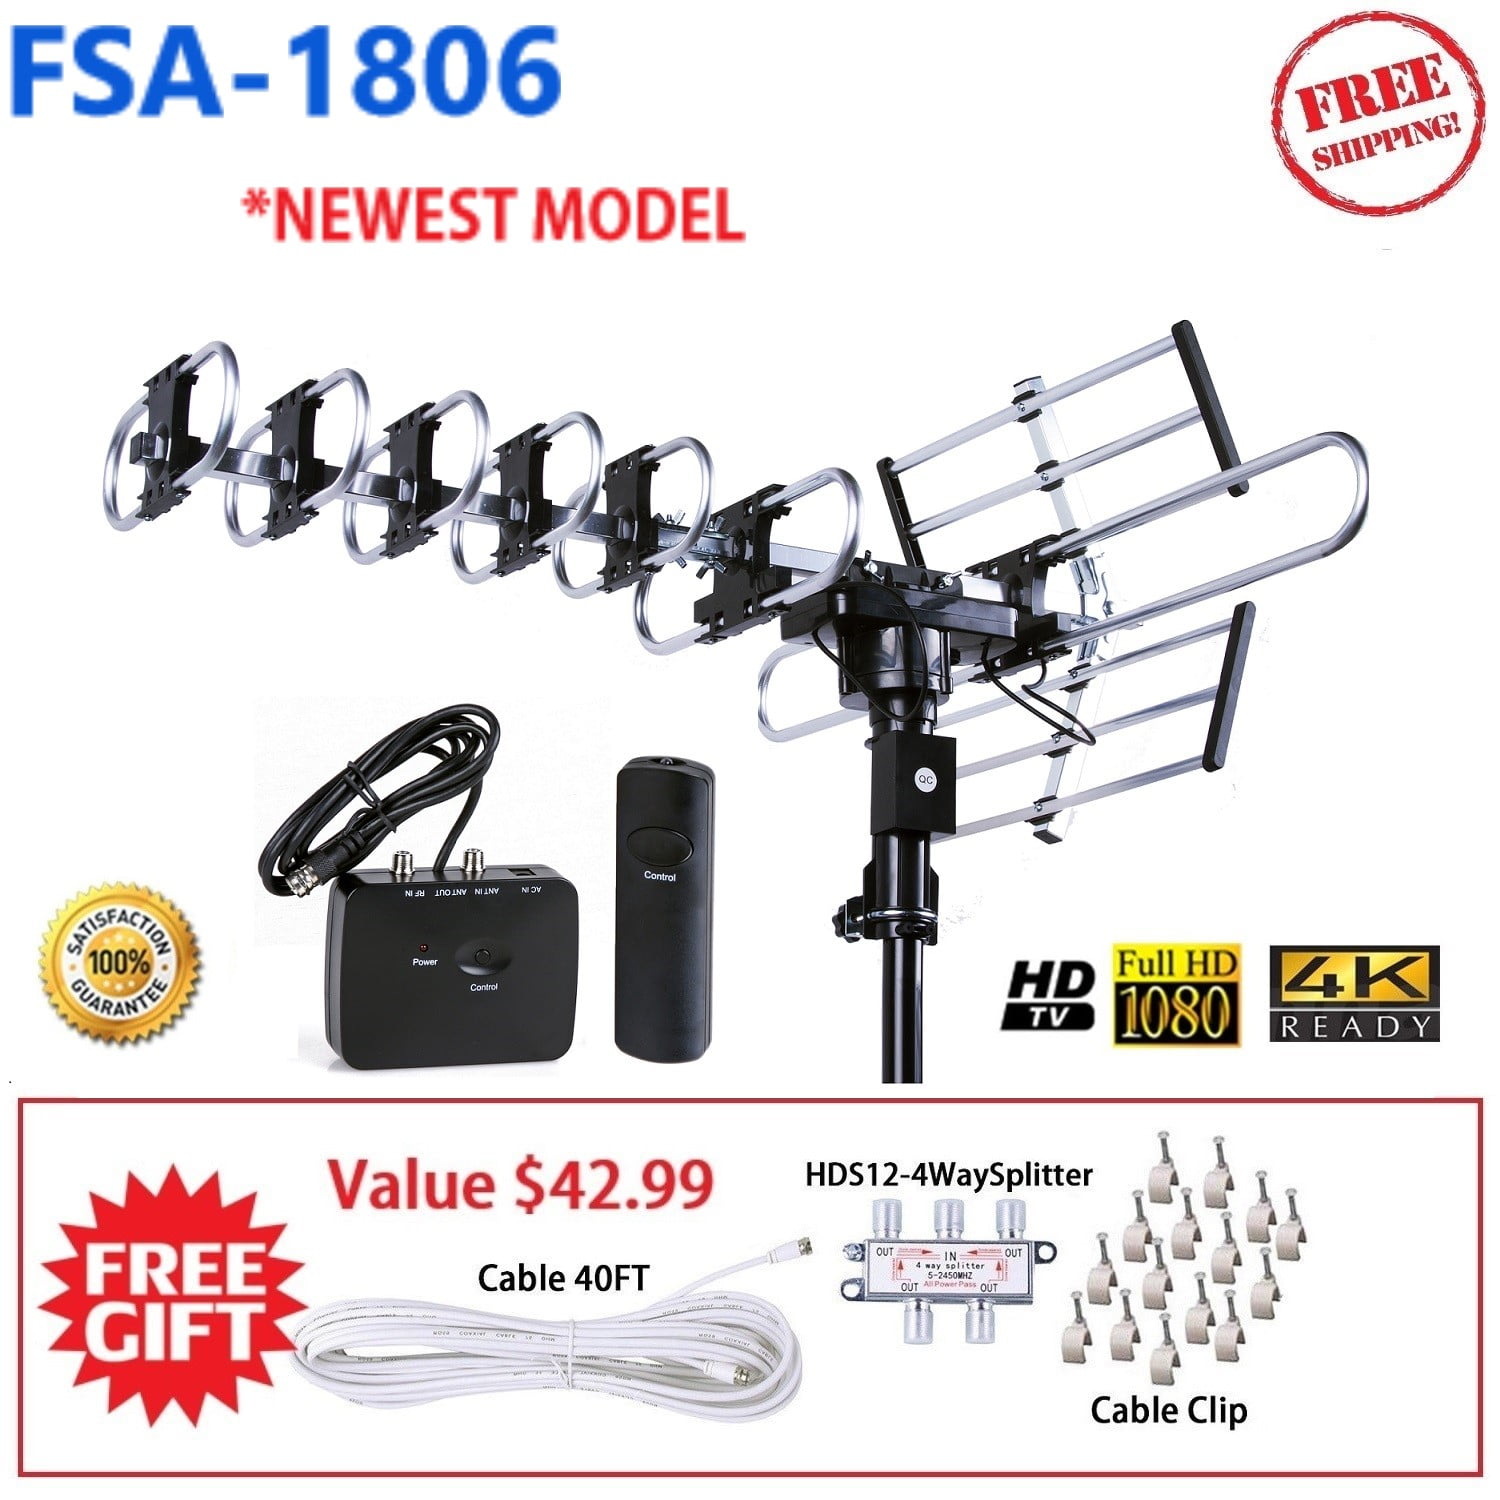 1080P 4K Outdoor Digital HD TV Antenna 360 Degrees Rotation 150 Mile Range Receive UHF VHF FM Signal with Remote Controller COMOTS HDTV Antenna 